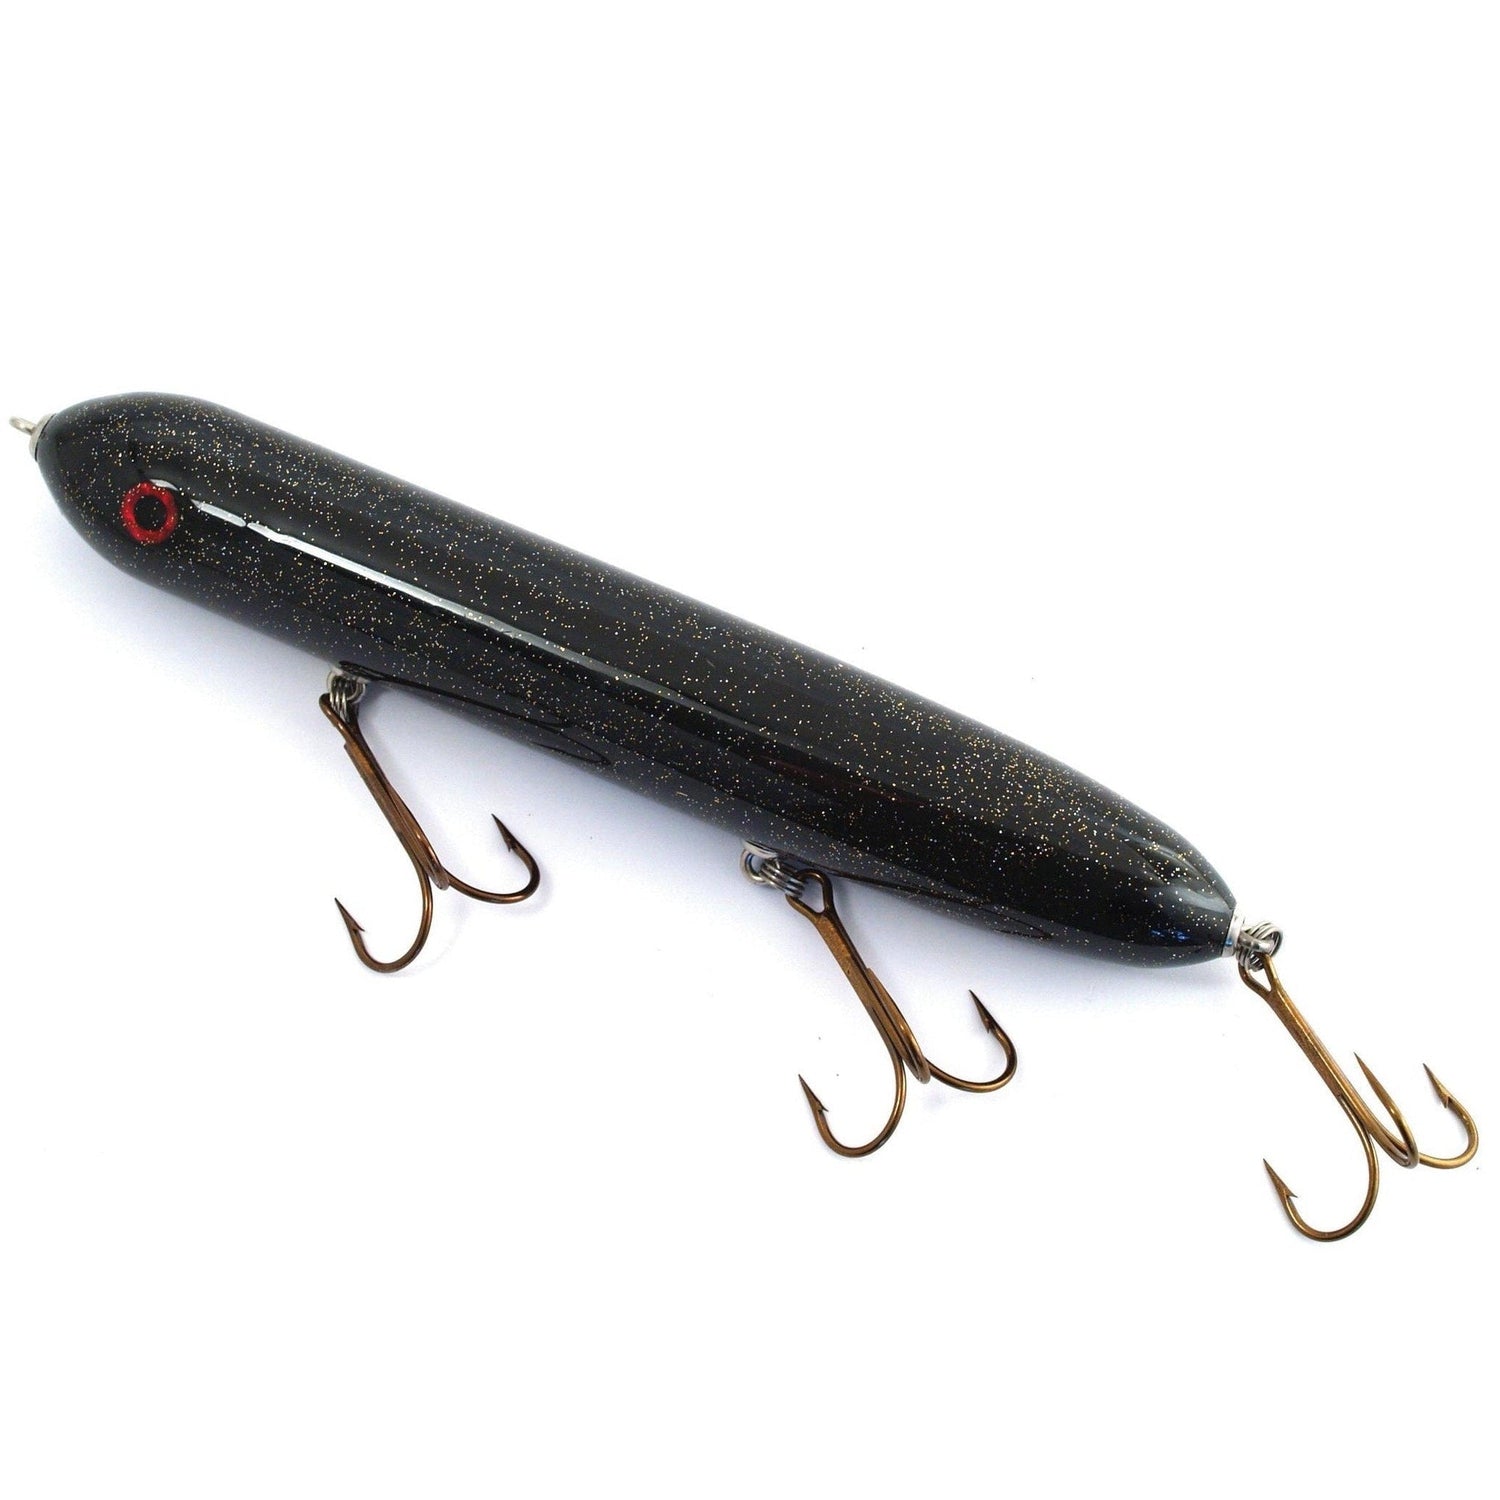 View of Topwater Suick Weagle 8" Topwater Cash available at EZOKO Pike and Musky Shop